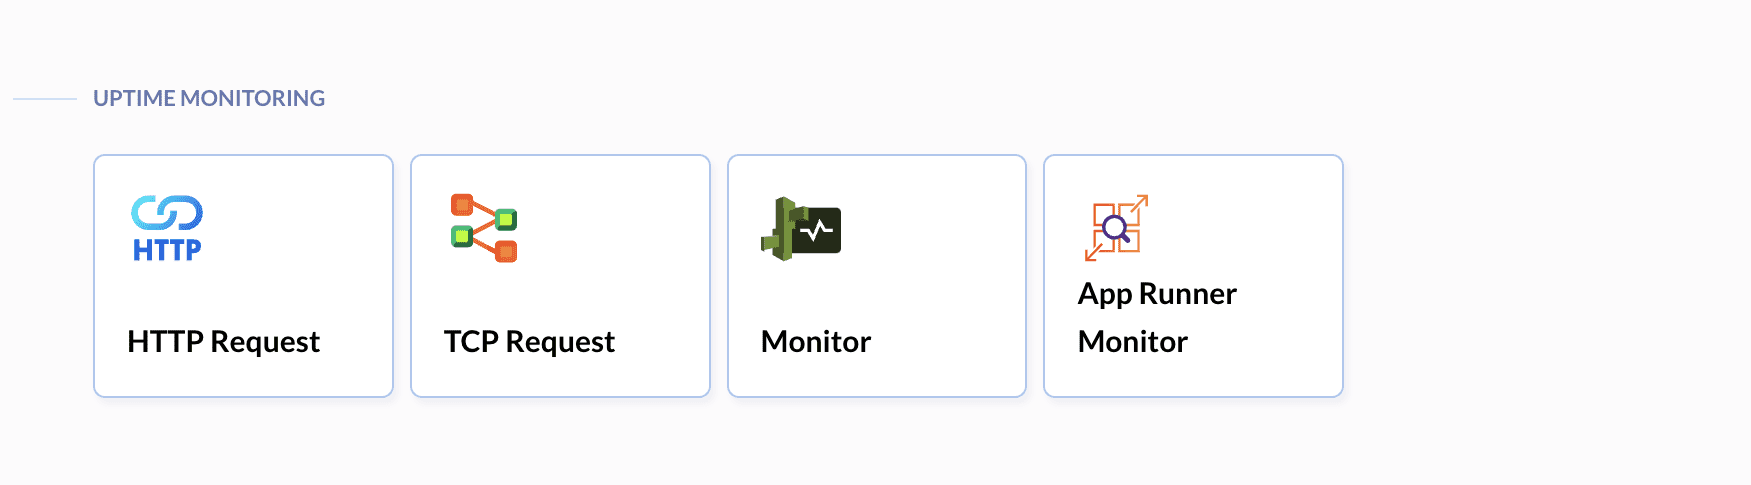 Uptime monitoring actions